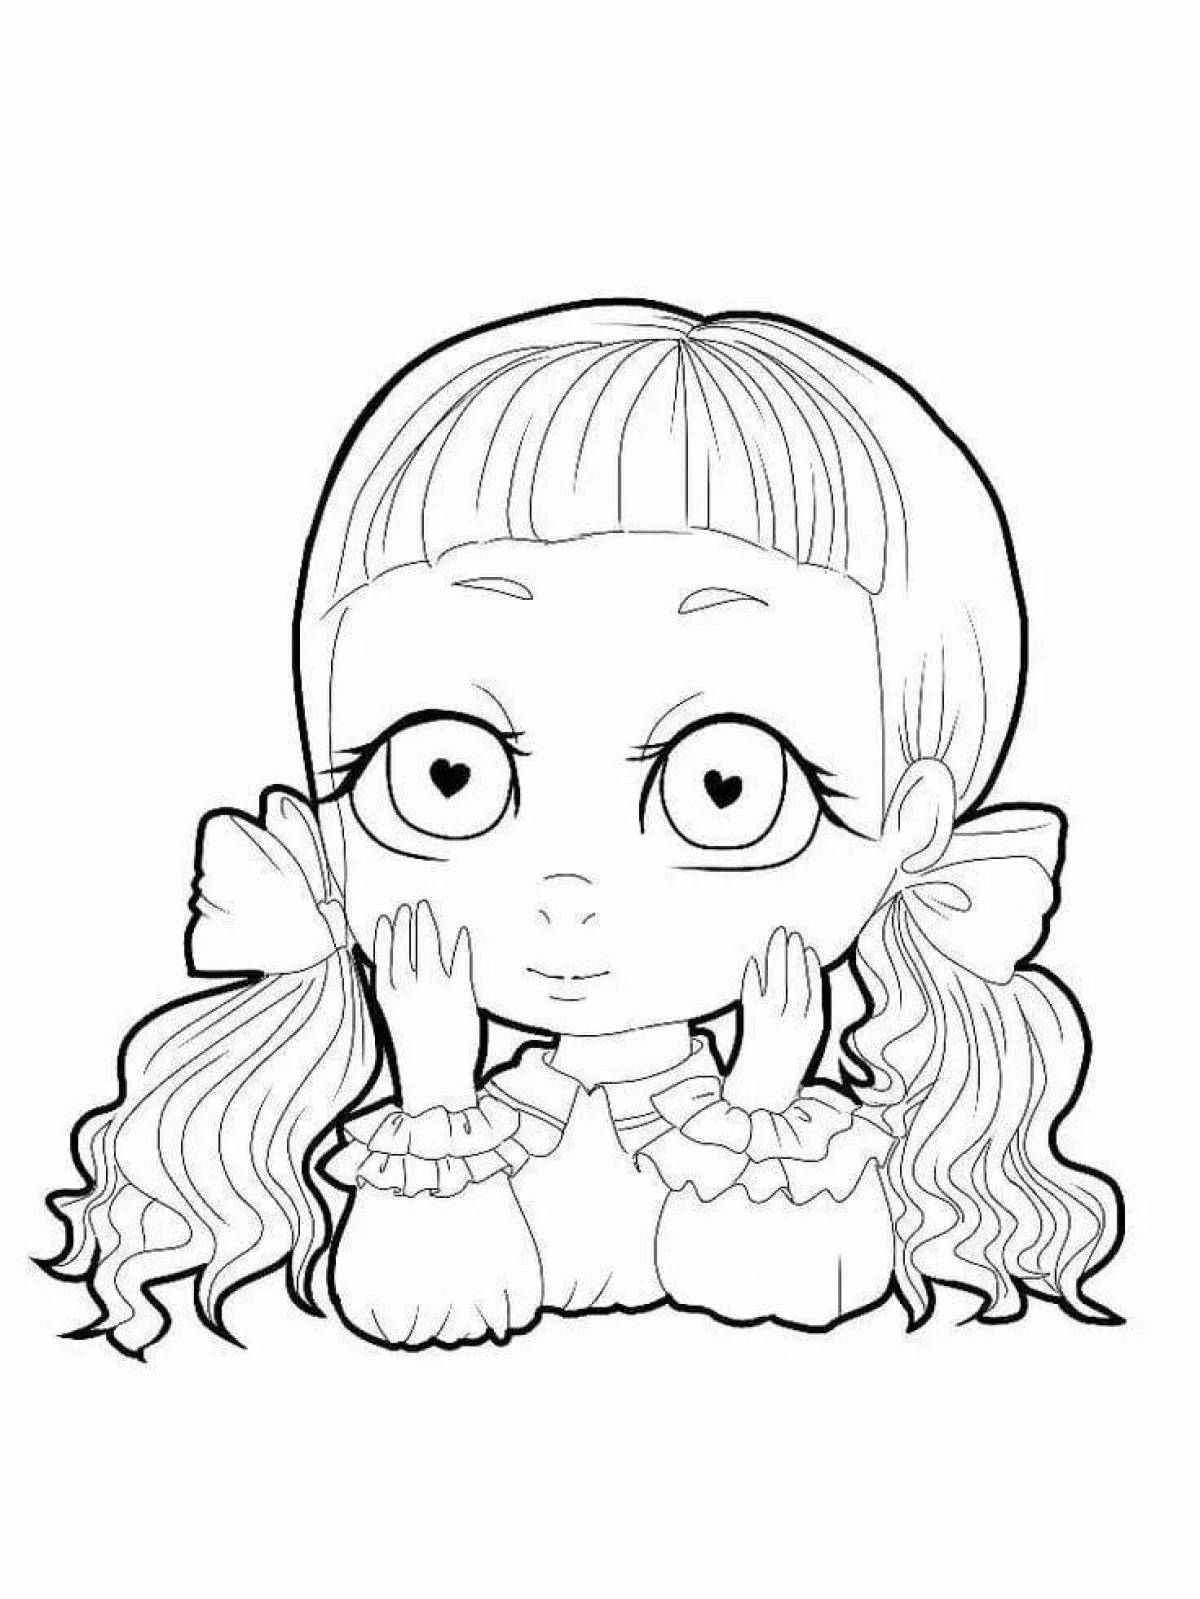 Melanie martinez colorful coloring page